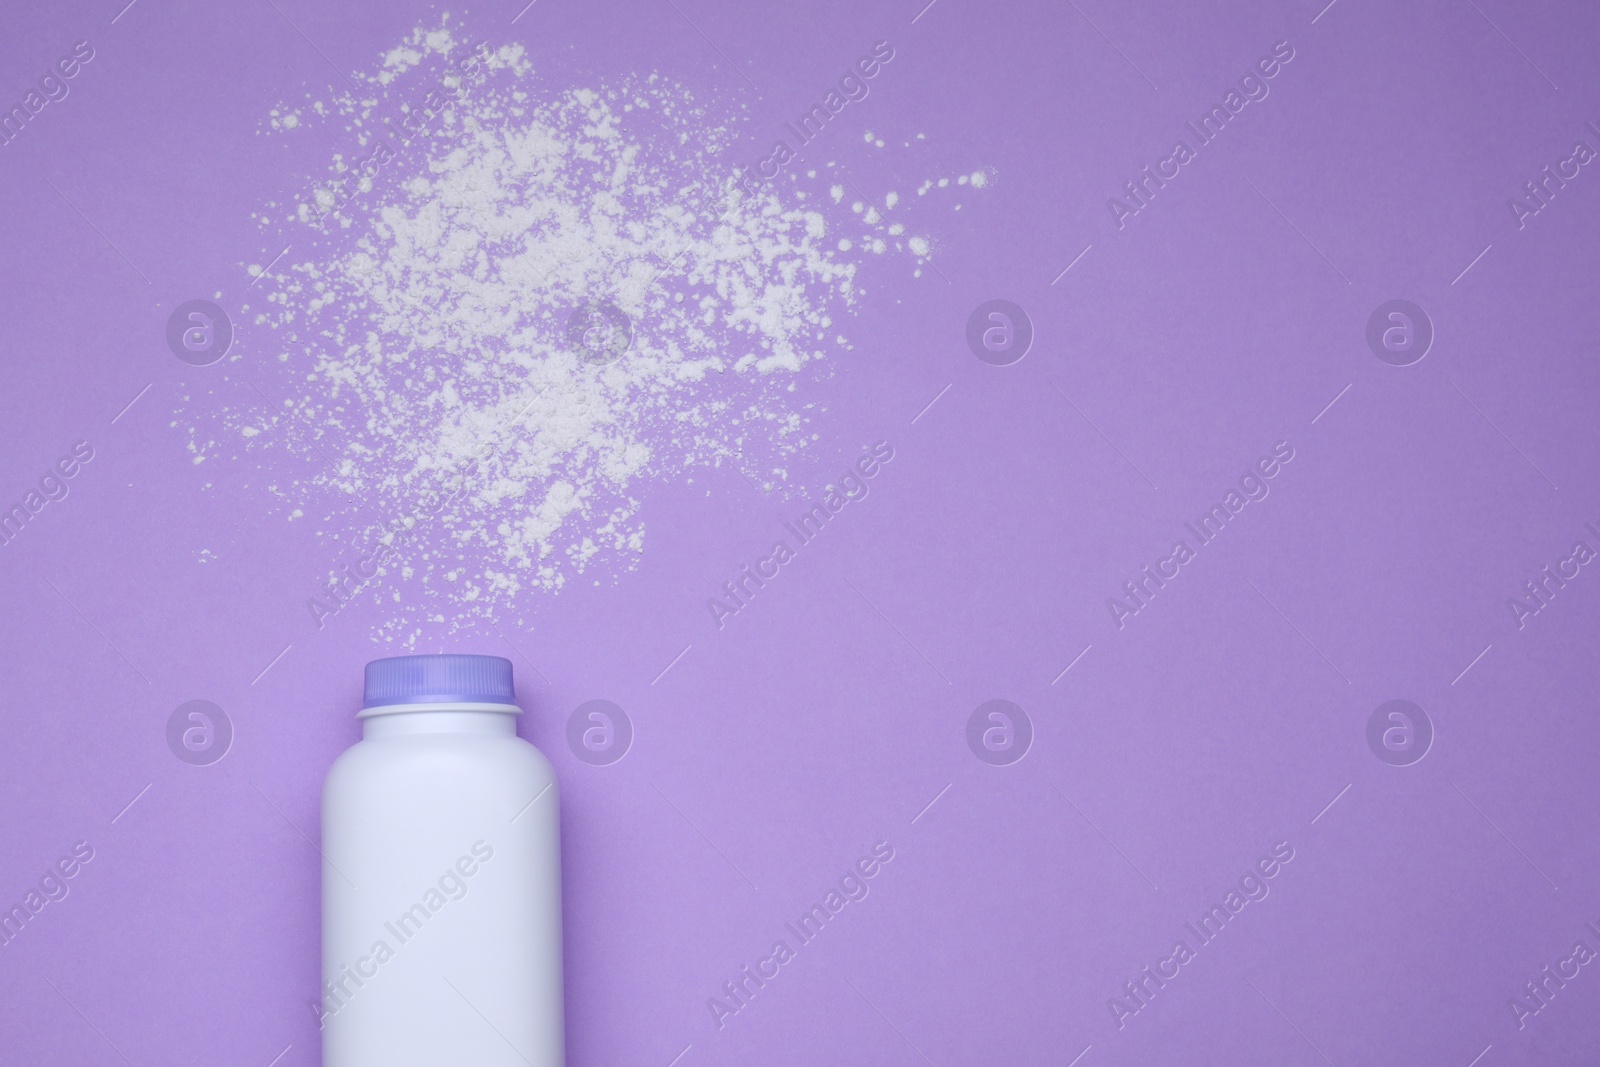 Photo of Bottle and scattered dusting powder on violet background, top view with space for text. Baby cosmetic product